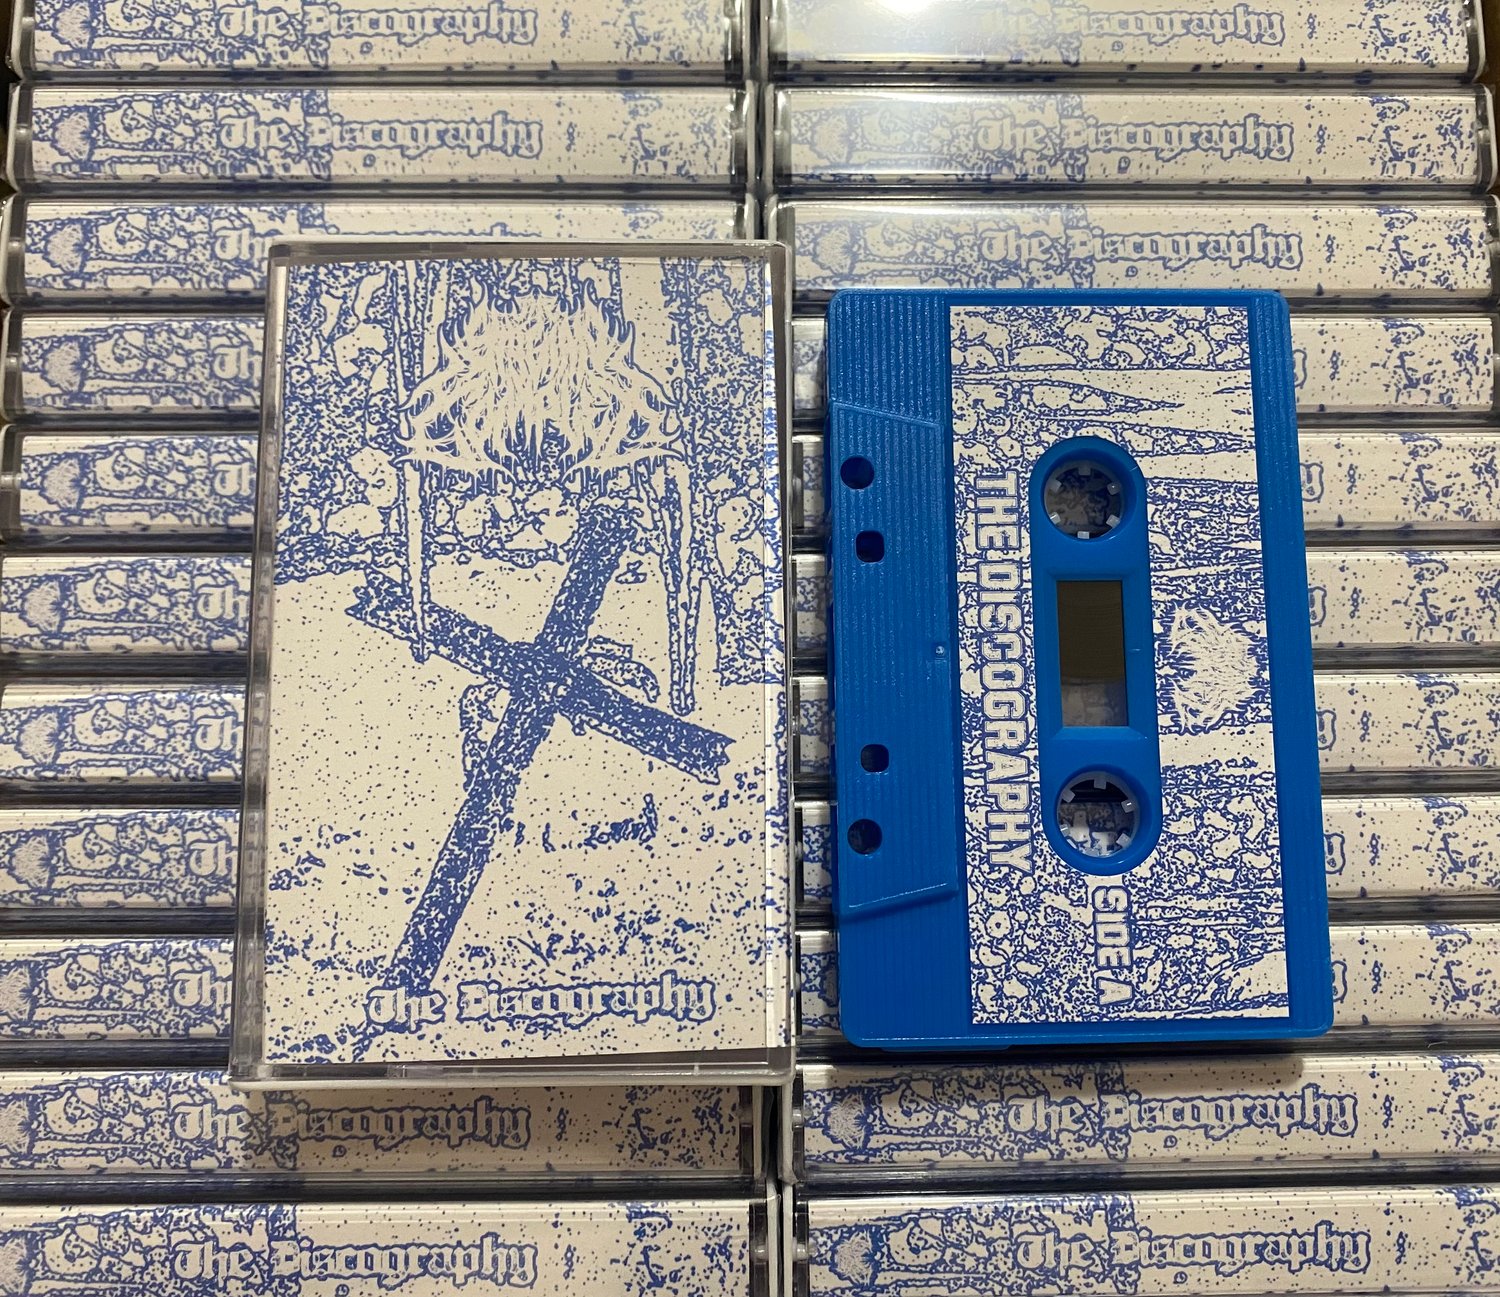 The Discography Cassette Tape [4 LEFT]